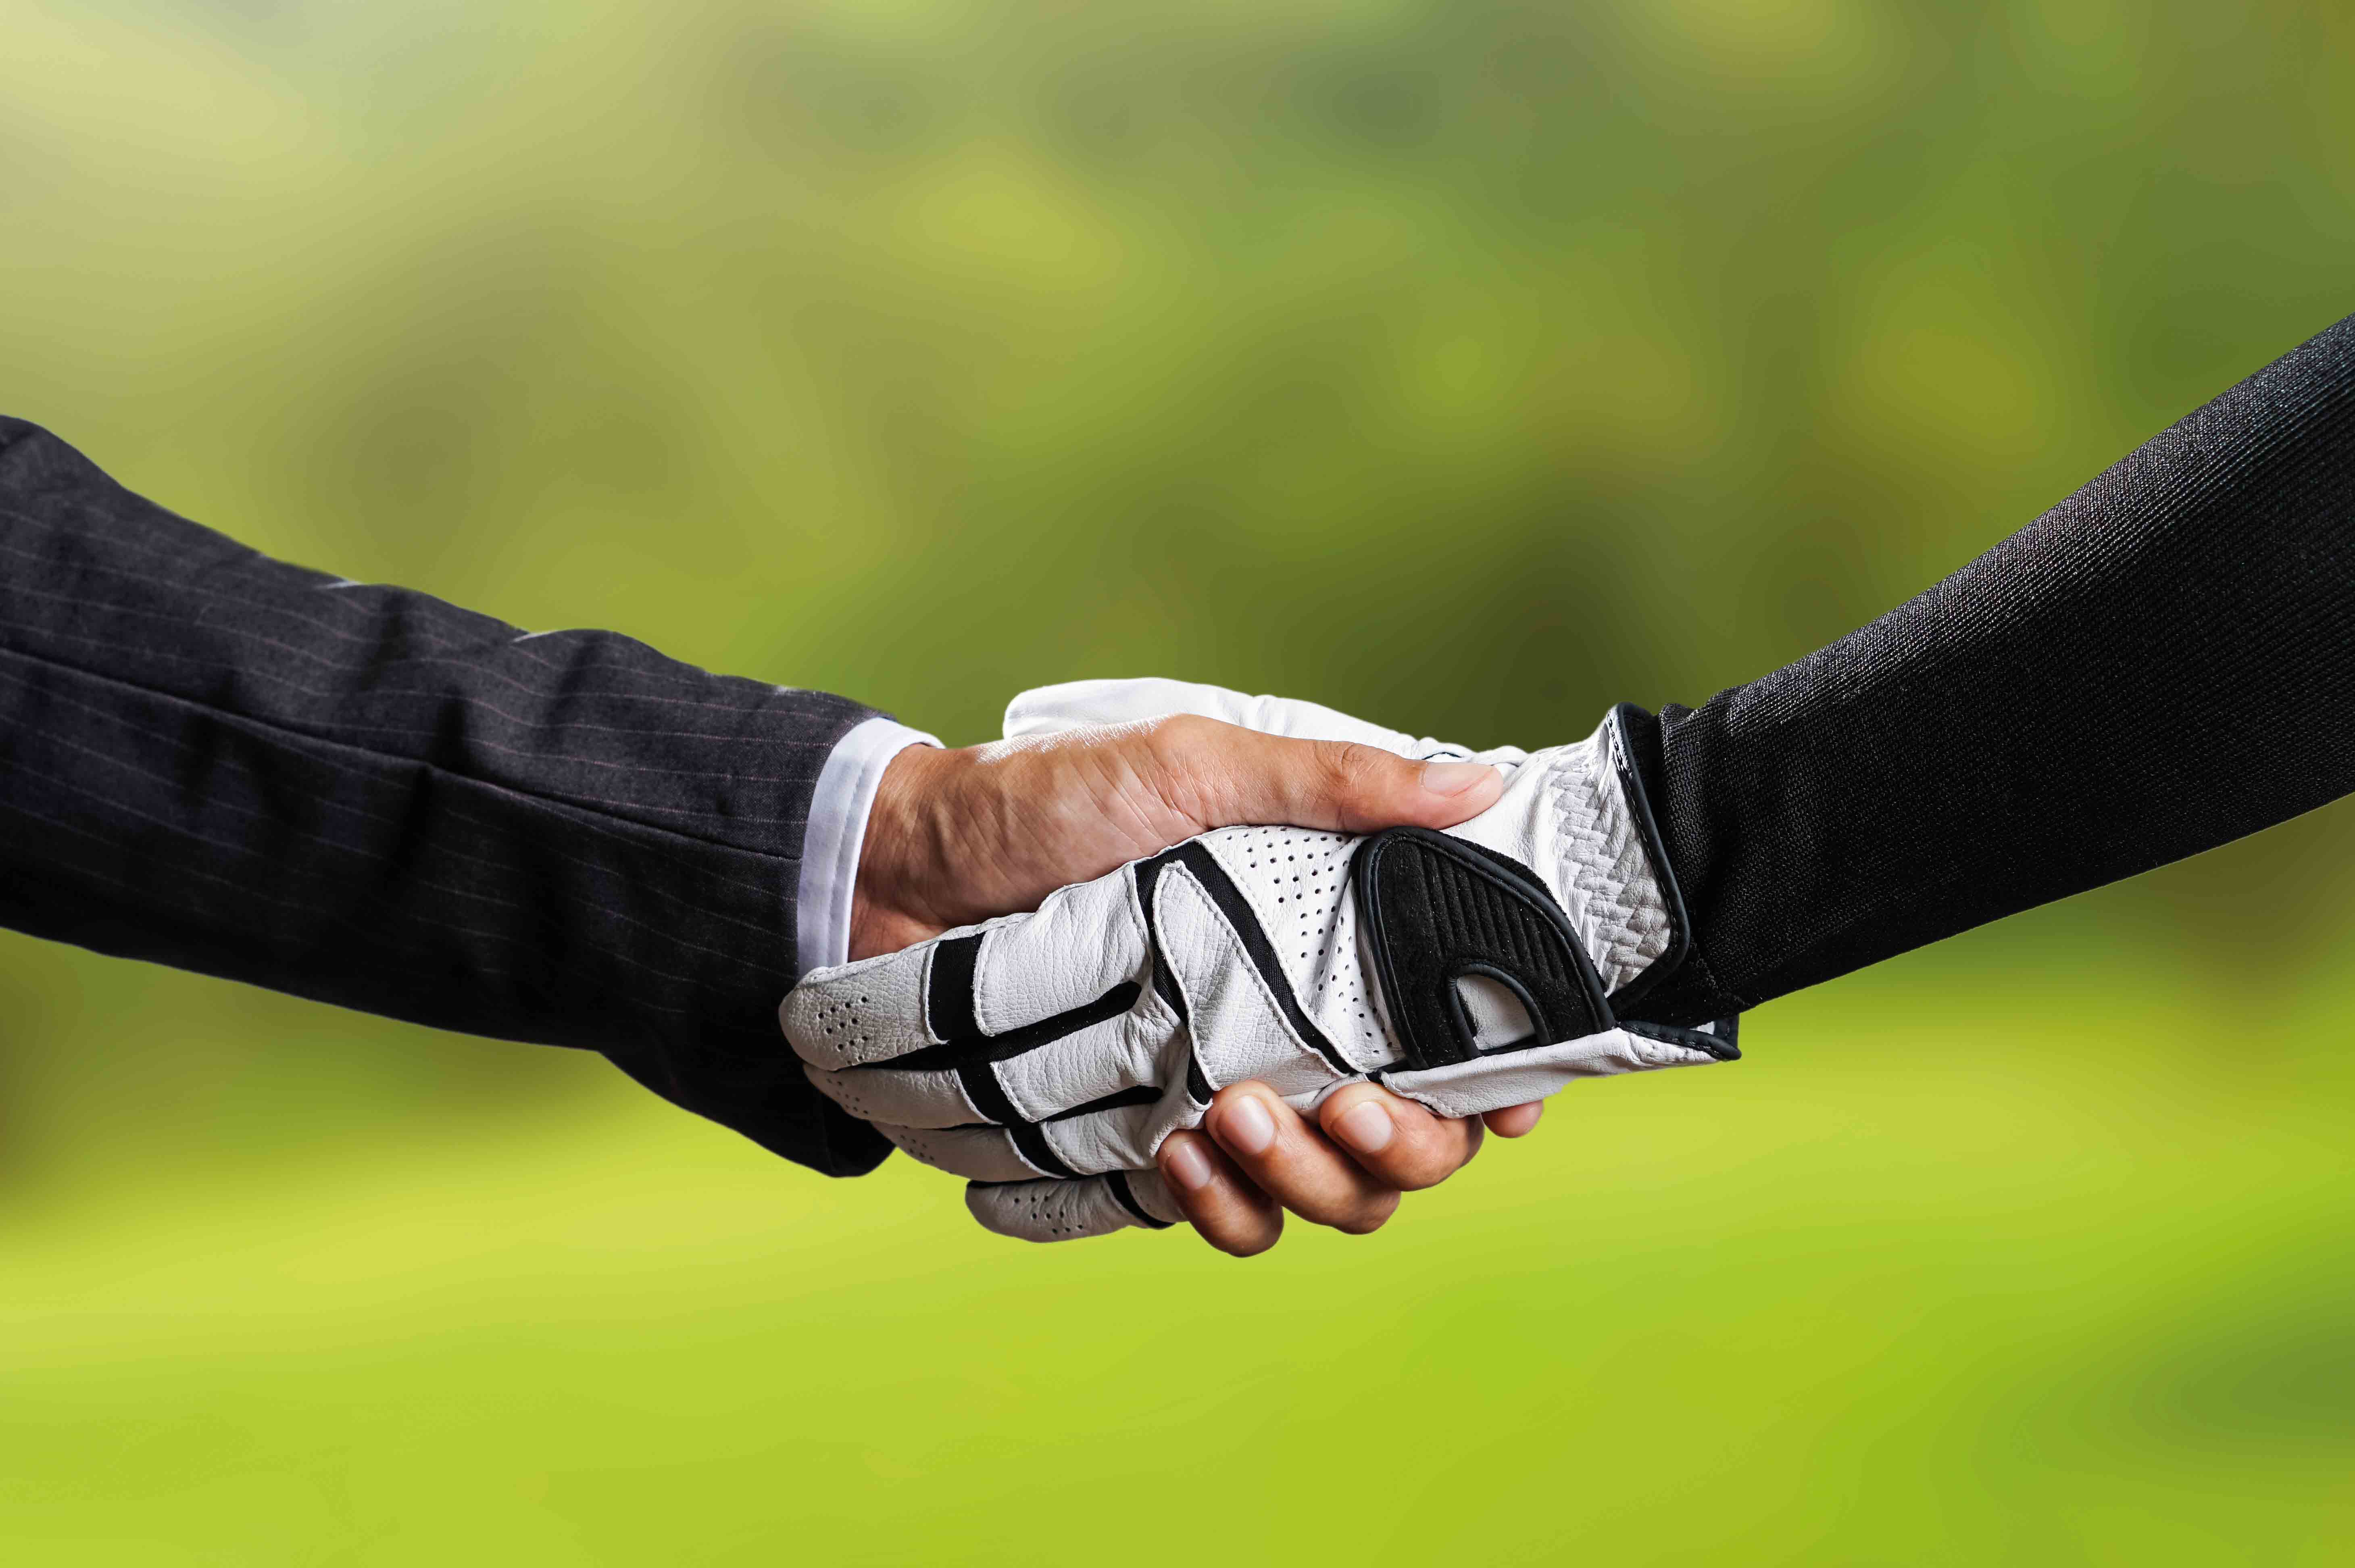 Man in suit shaking hands with golfer